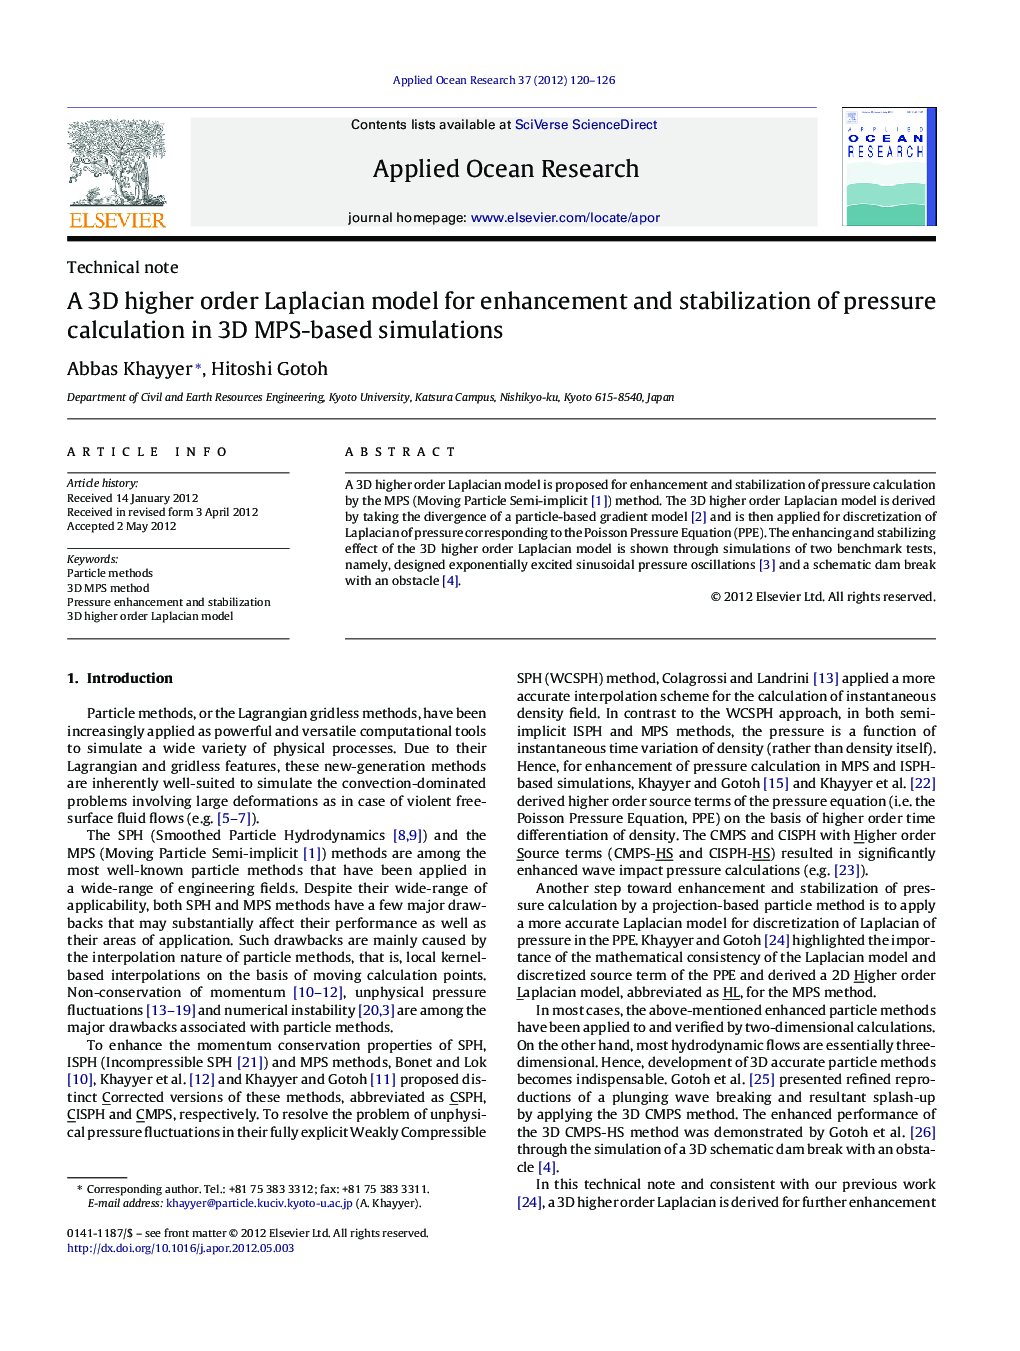 A 3D higher order Laplacian model for enhancement and stabilization of pressure calculation in 3D MPS-based simulations